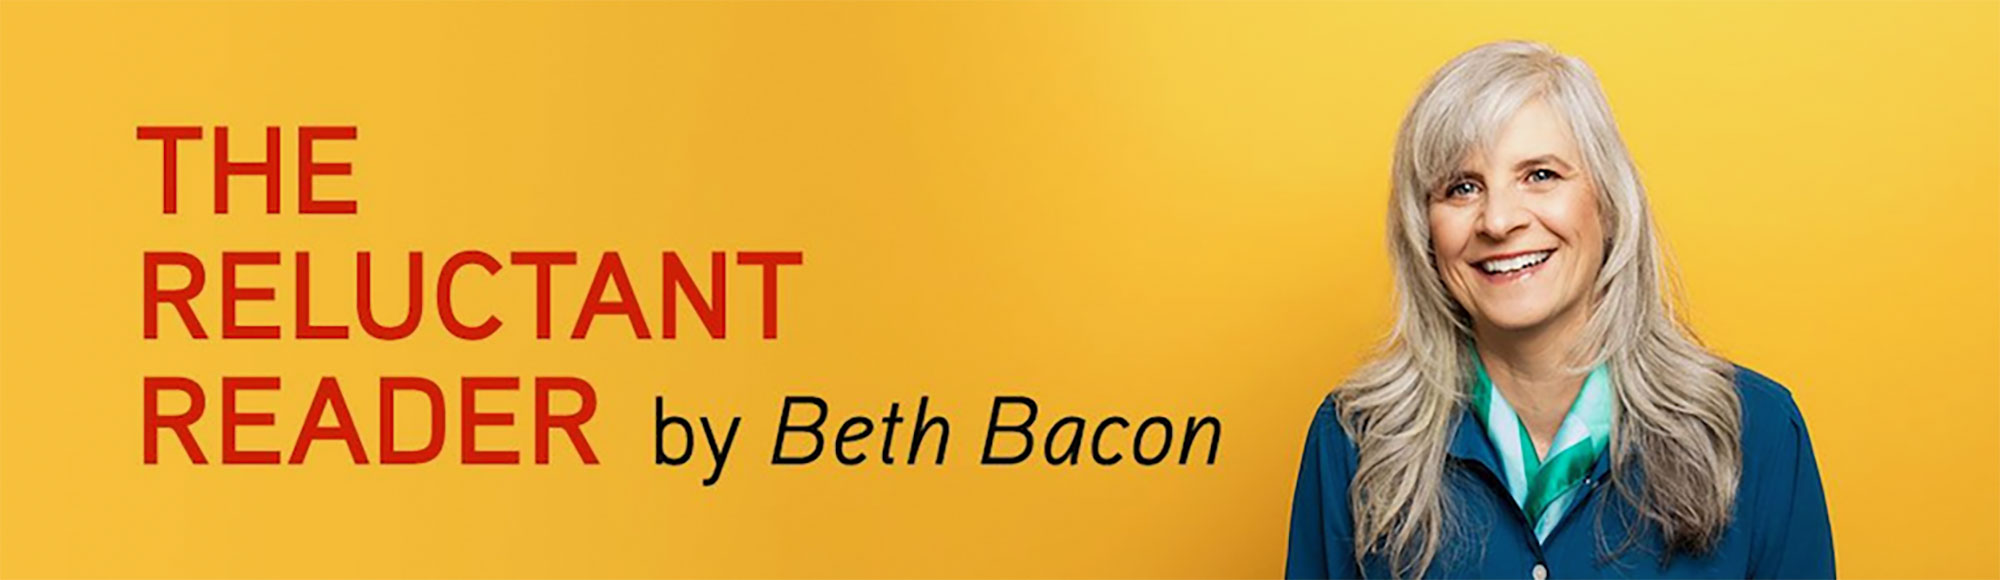 The Relcutant Reader by Beth Bacon